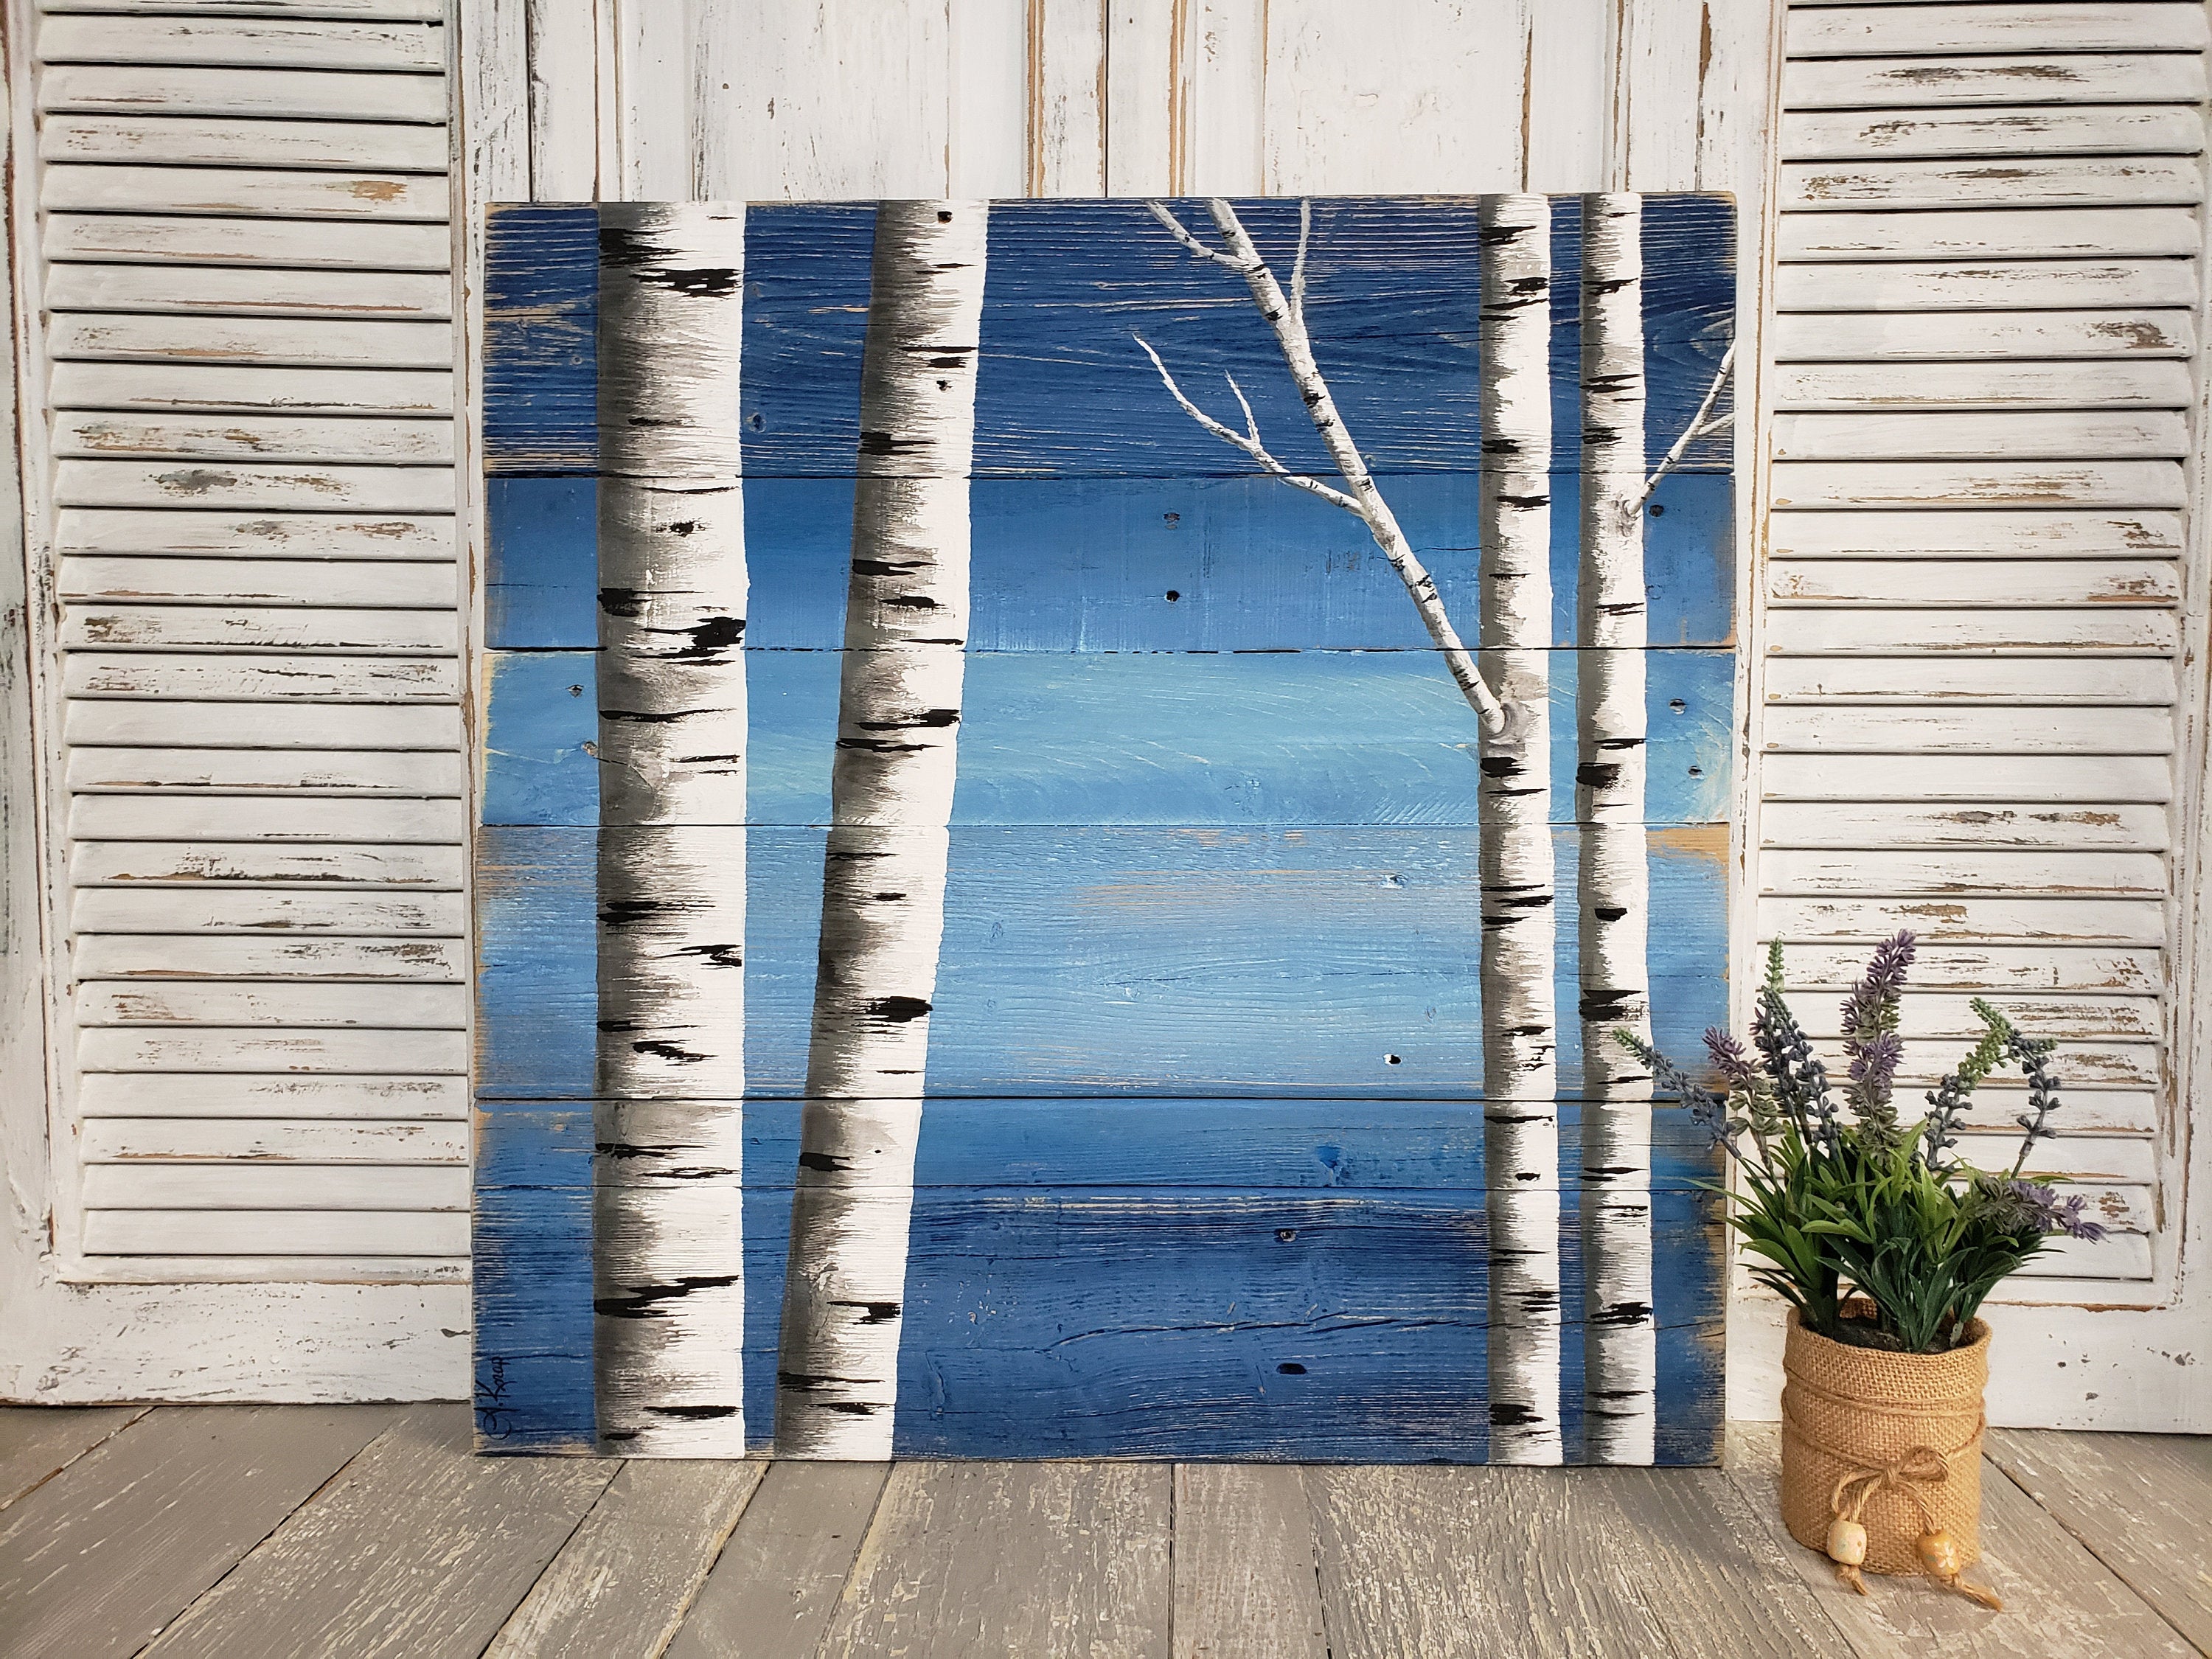 Sky blue white birch Painting on Pallet wood, 2 Piece set, Hand Painted aspen trees, couch artwork